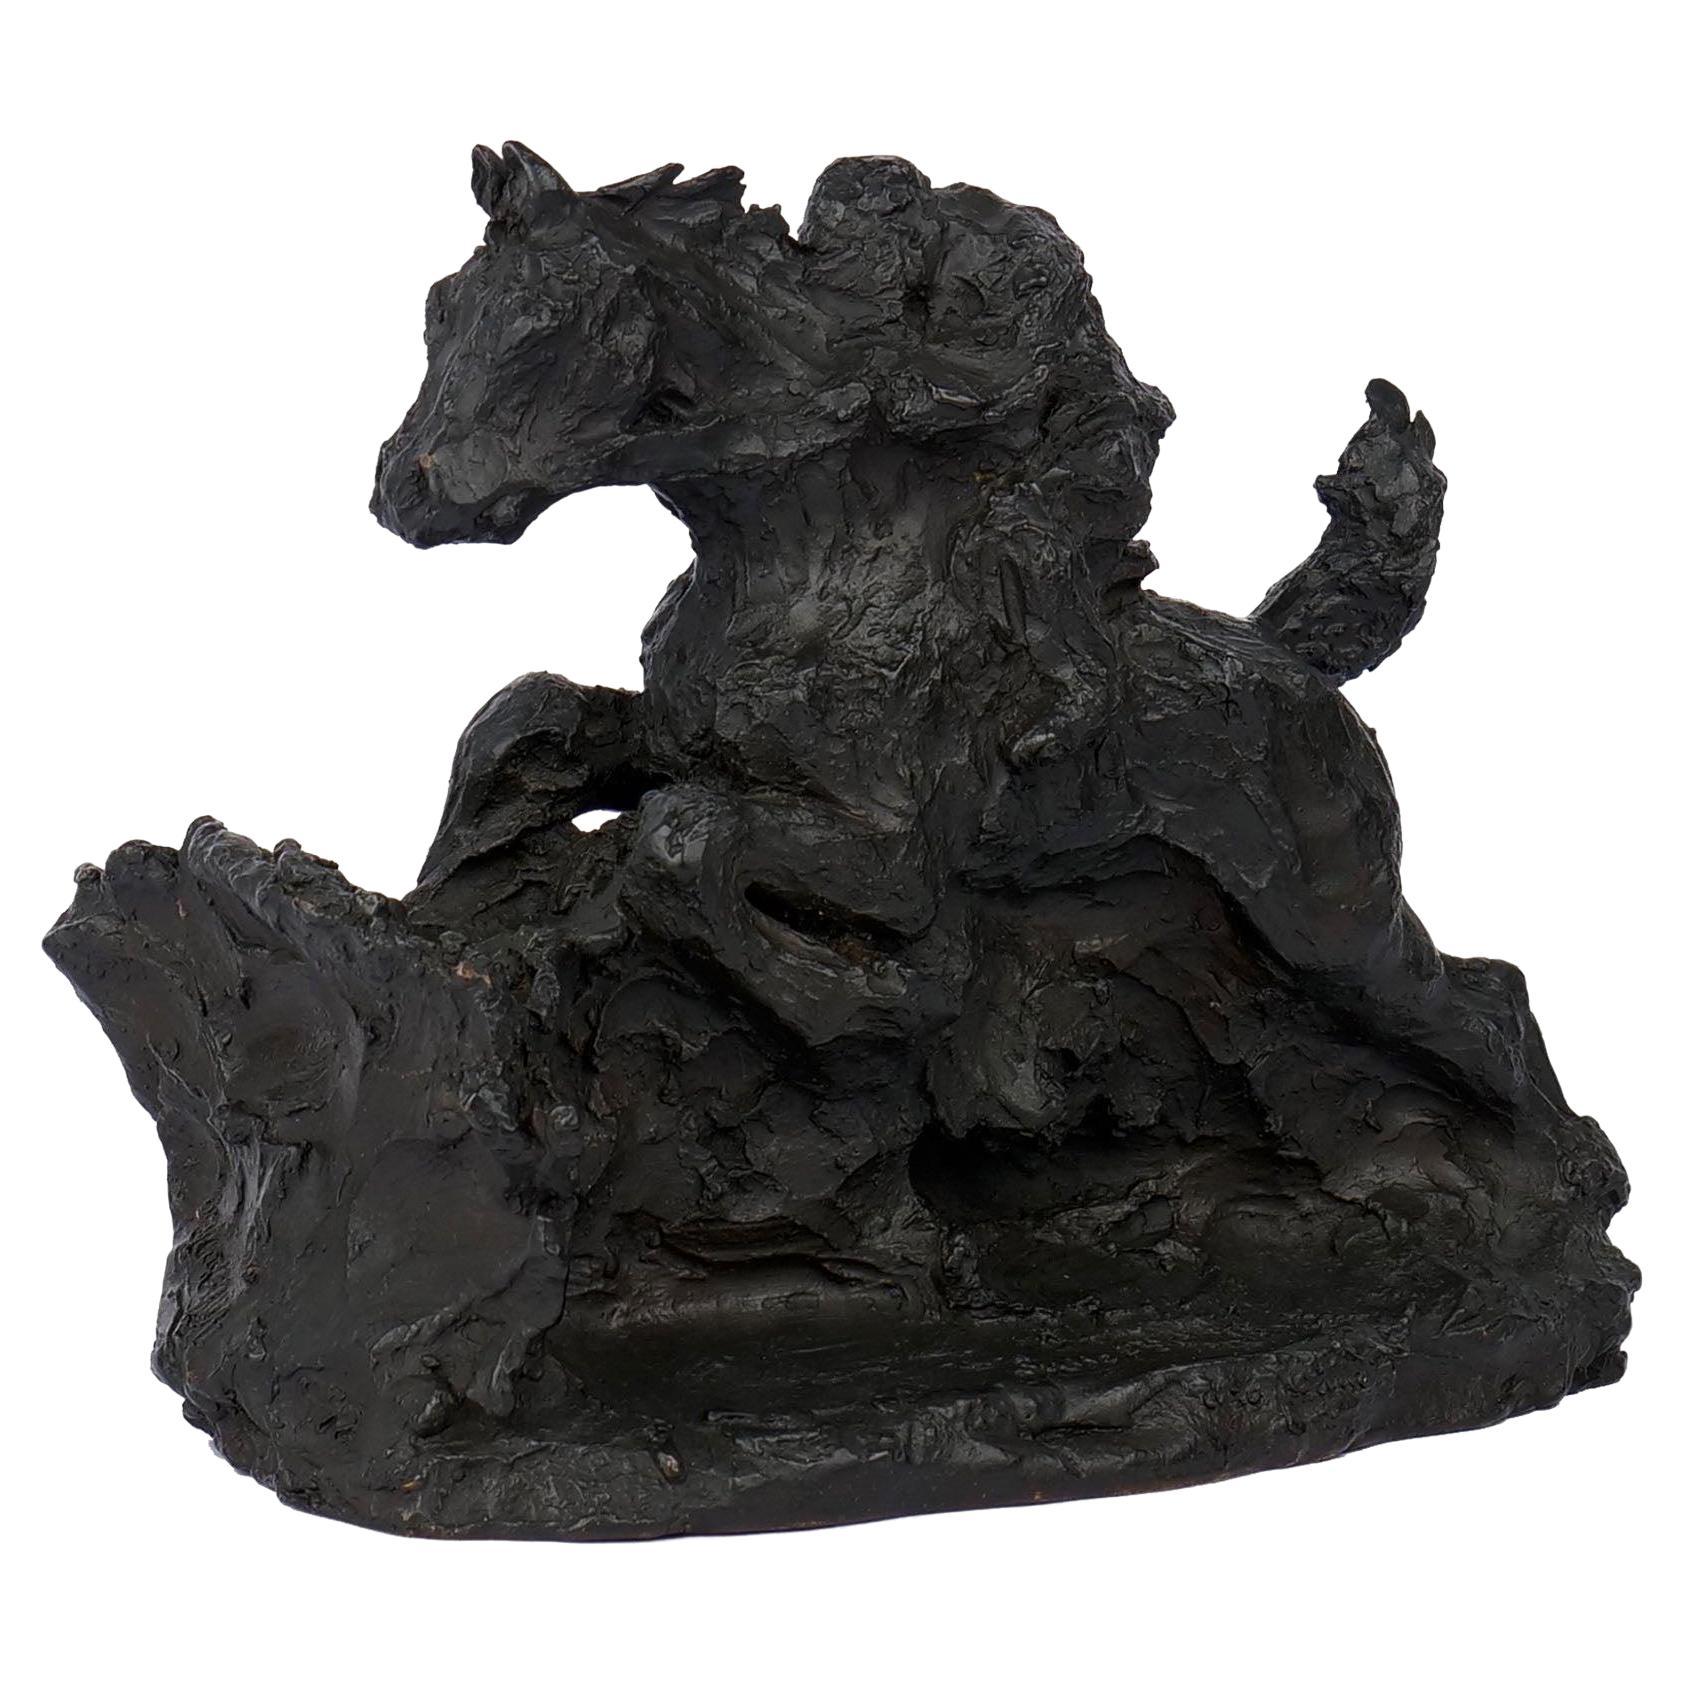 French Modernist Bronze Sculpture of “Horse & Rider” Cast by Susse Freres